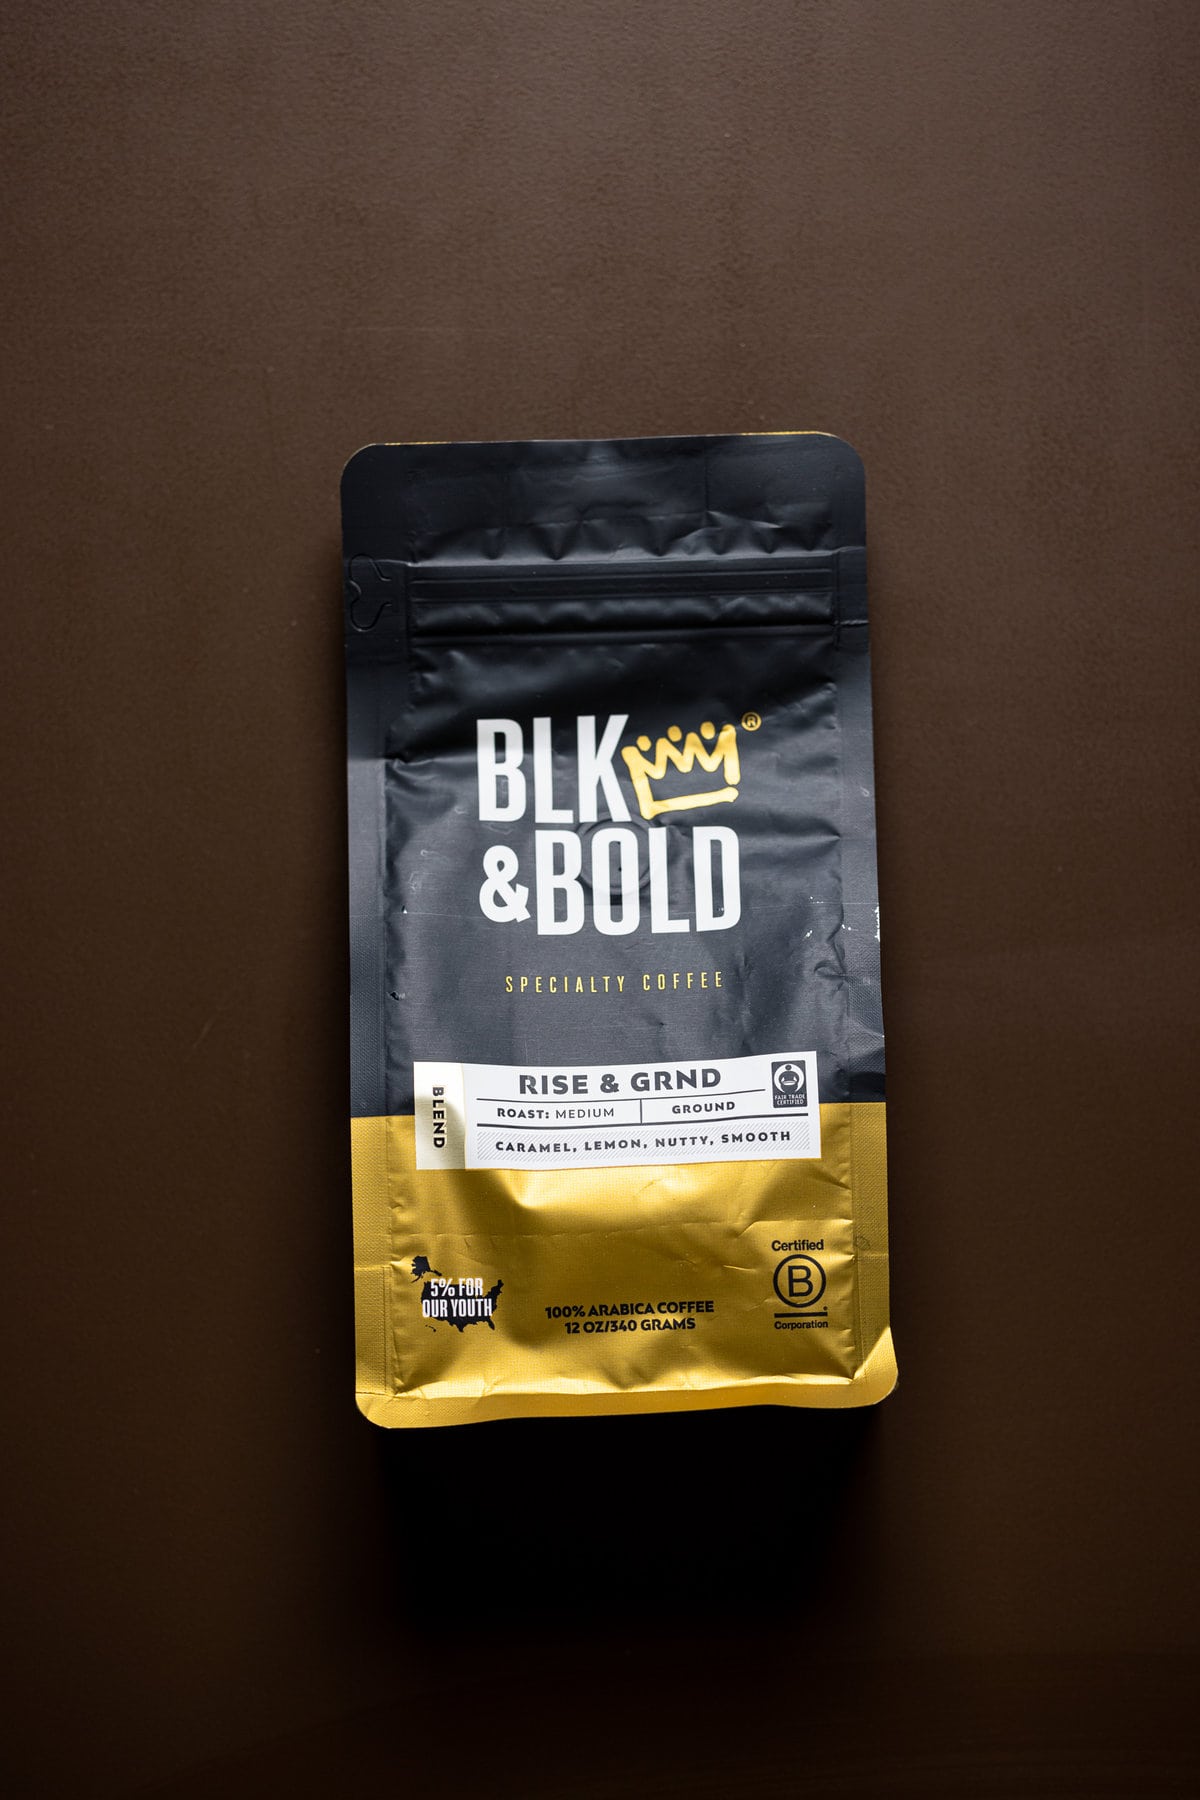 Bag of BLK & BOLD Specialty Coffee, Rise & Grnd